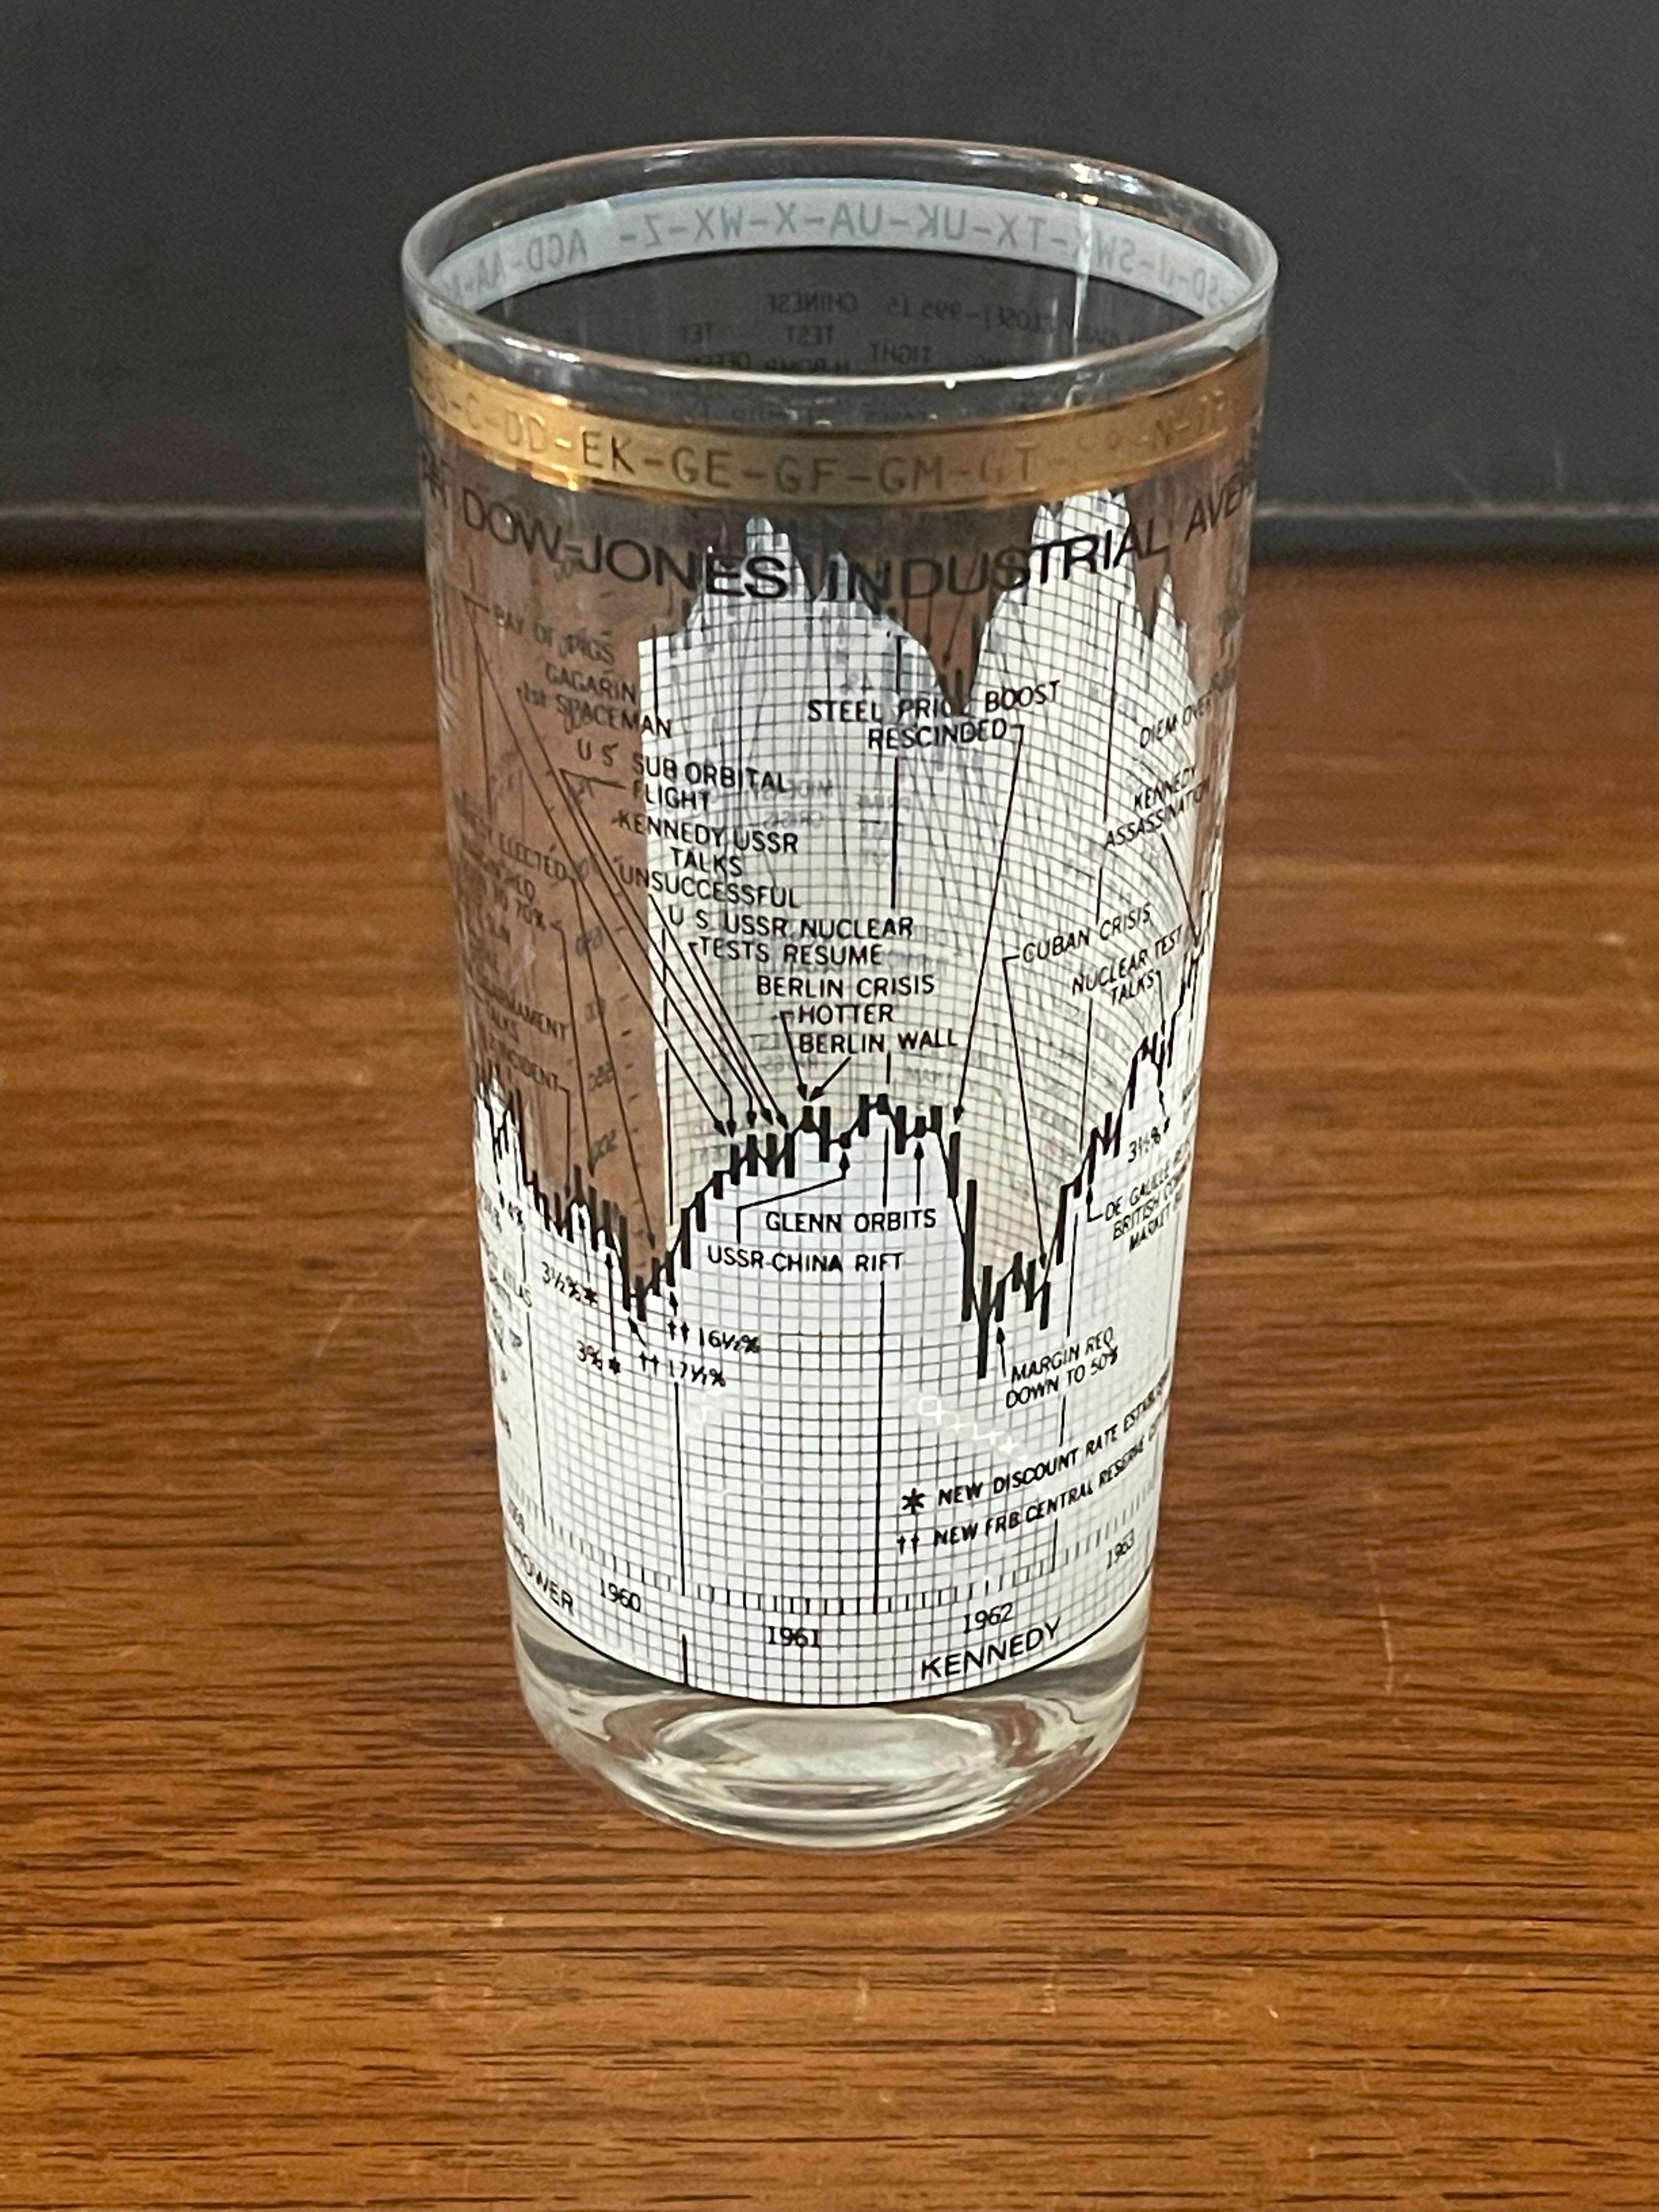 Set of Six Stock Market / Wall Street / Dow Jones / High Ball Glasses by Cera In Good Condition For Sale In San Diego, CA